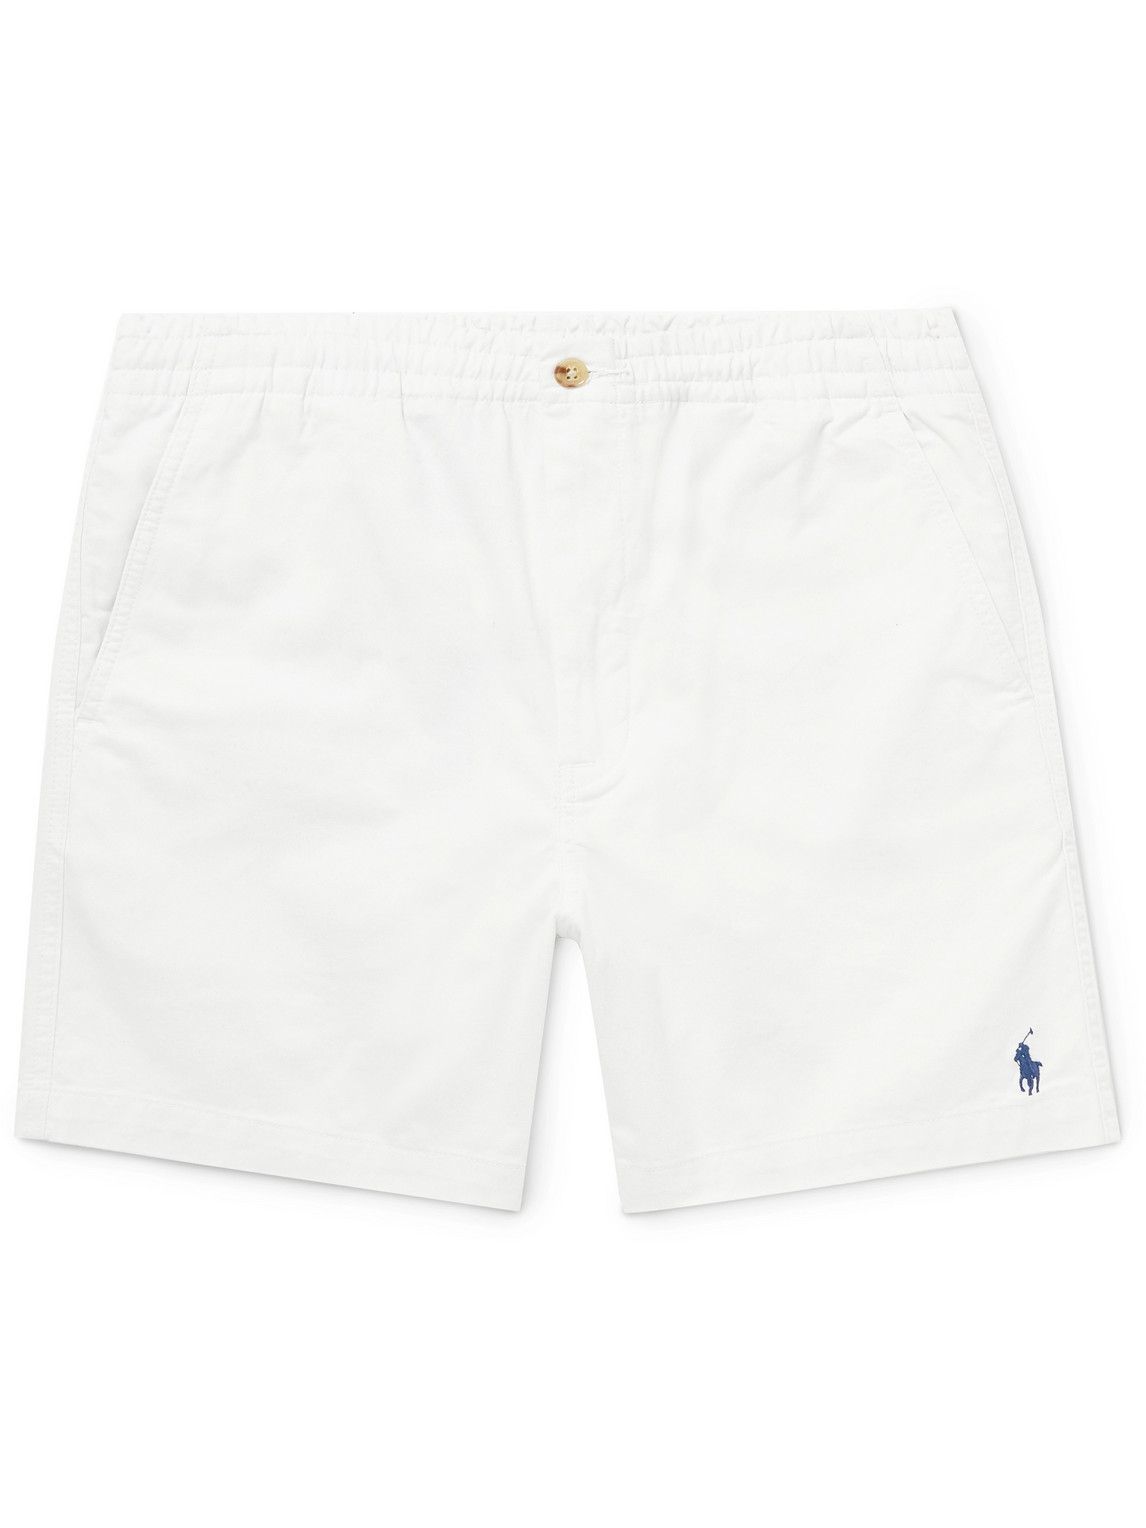 Polo Ralph Lauren - Logo-Embroidered Cotton-Blend Twill Shorts - White